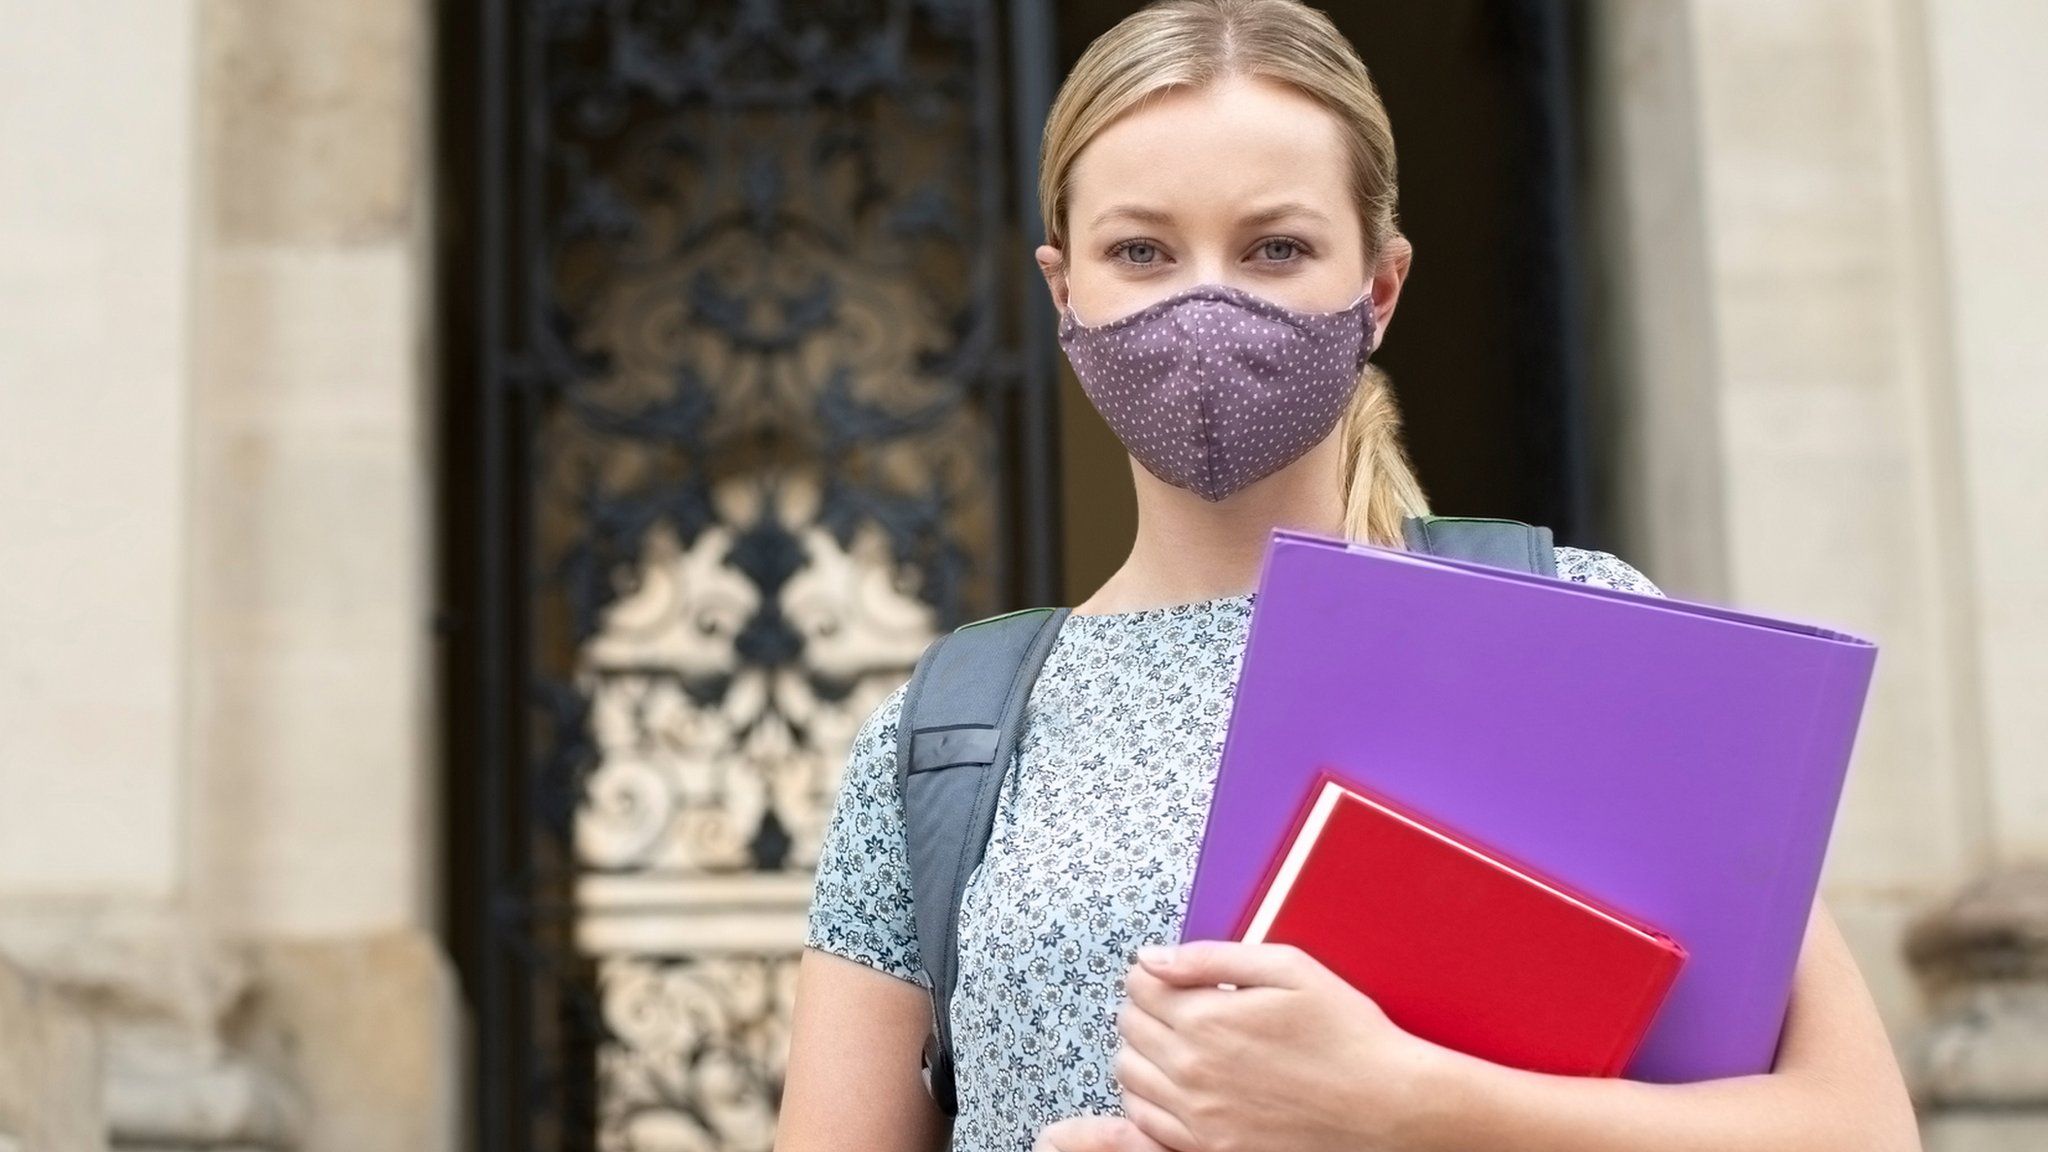 A woman wears a mask while holding folders outside a university building